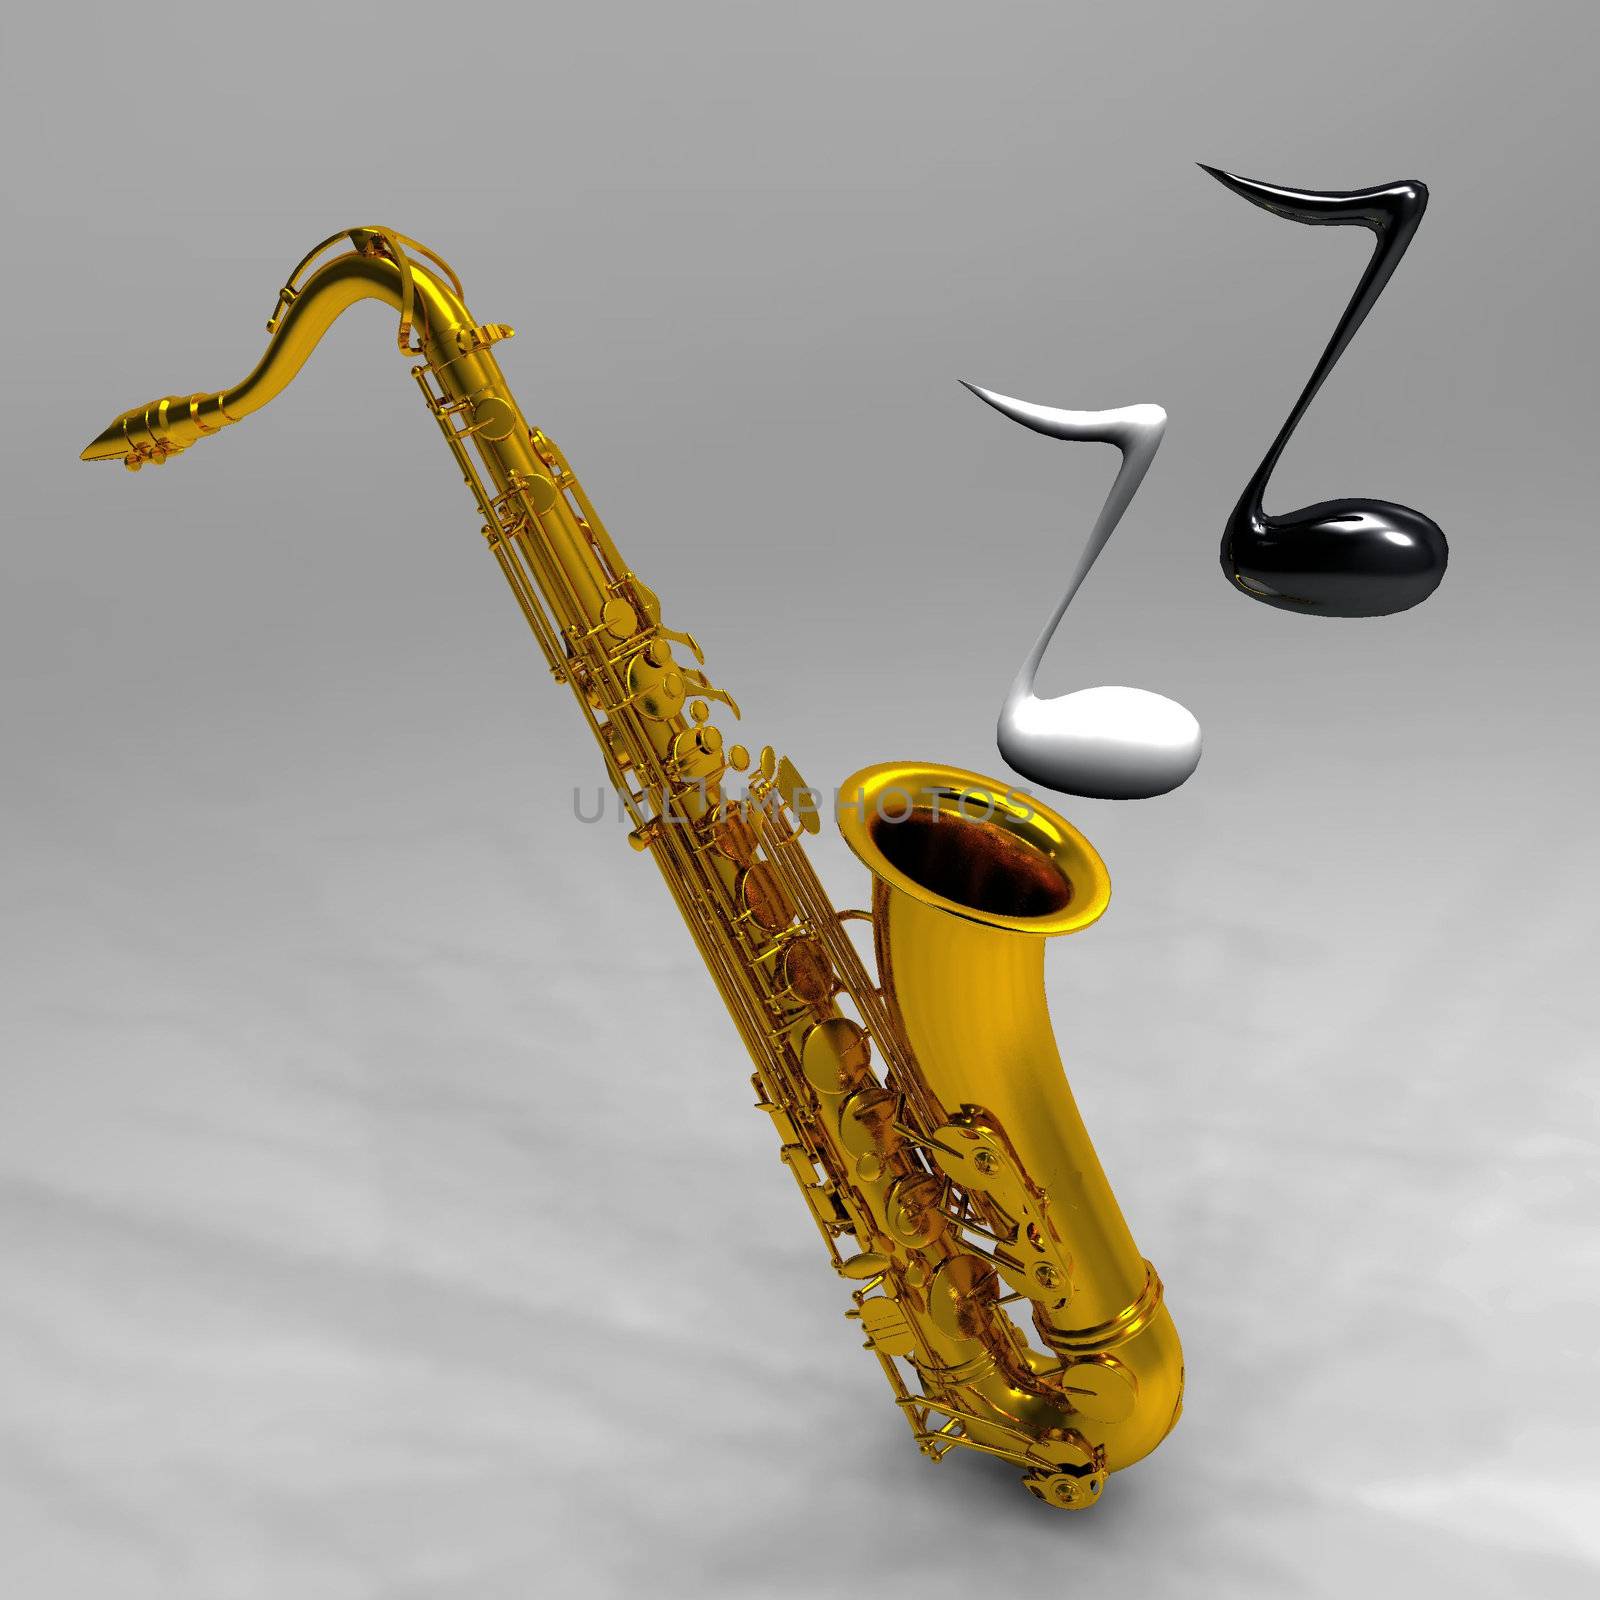 the saxophone and the notes by njaj